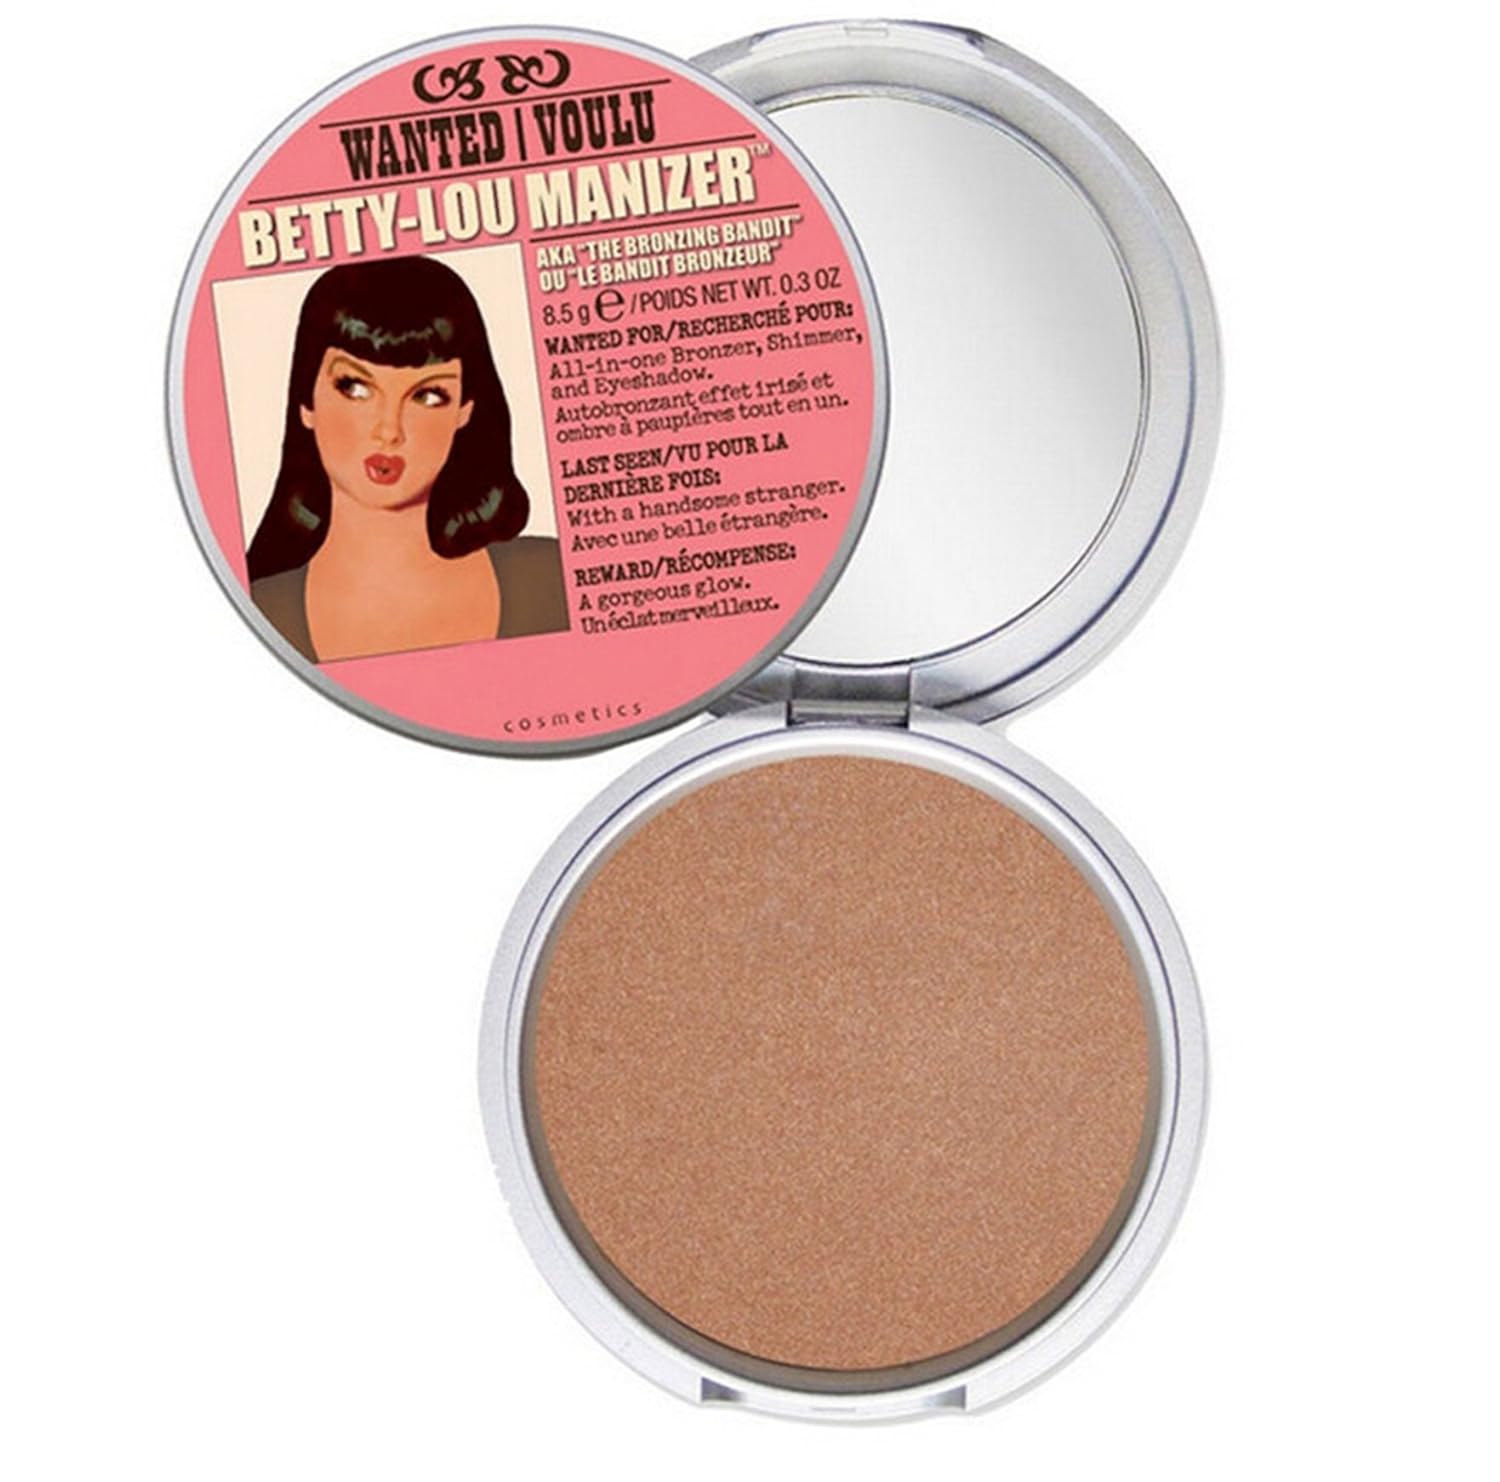 The Balm Betty-Loumanizer All-In-One Bronzer, Shimmer, and Eyeshadow Makeup 0.3